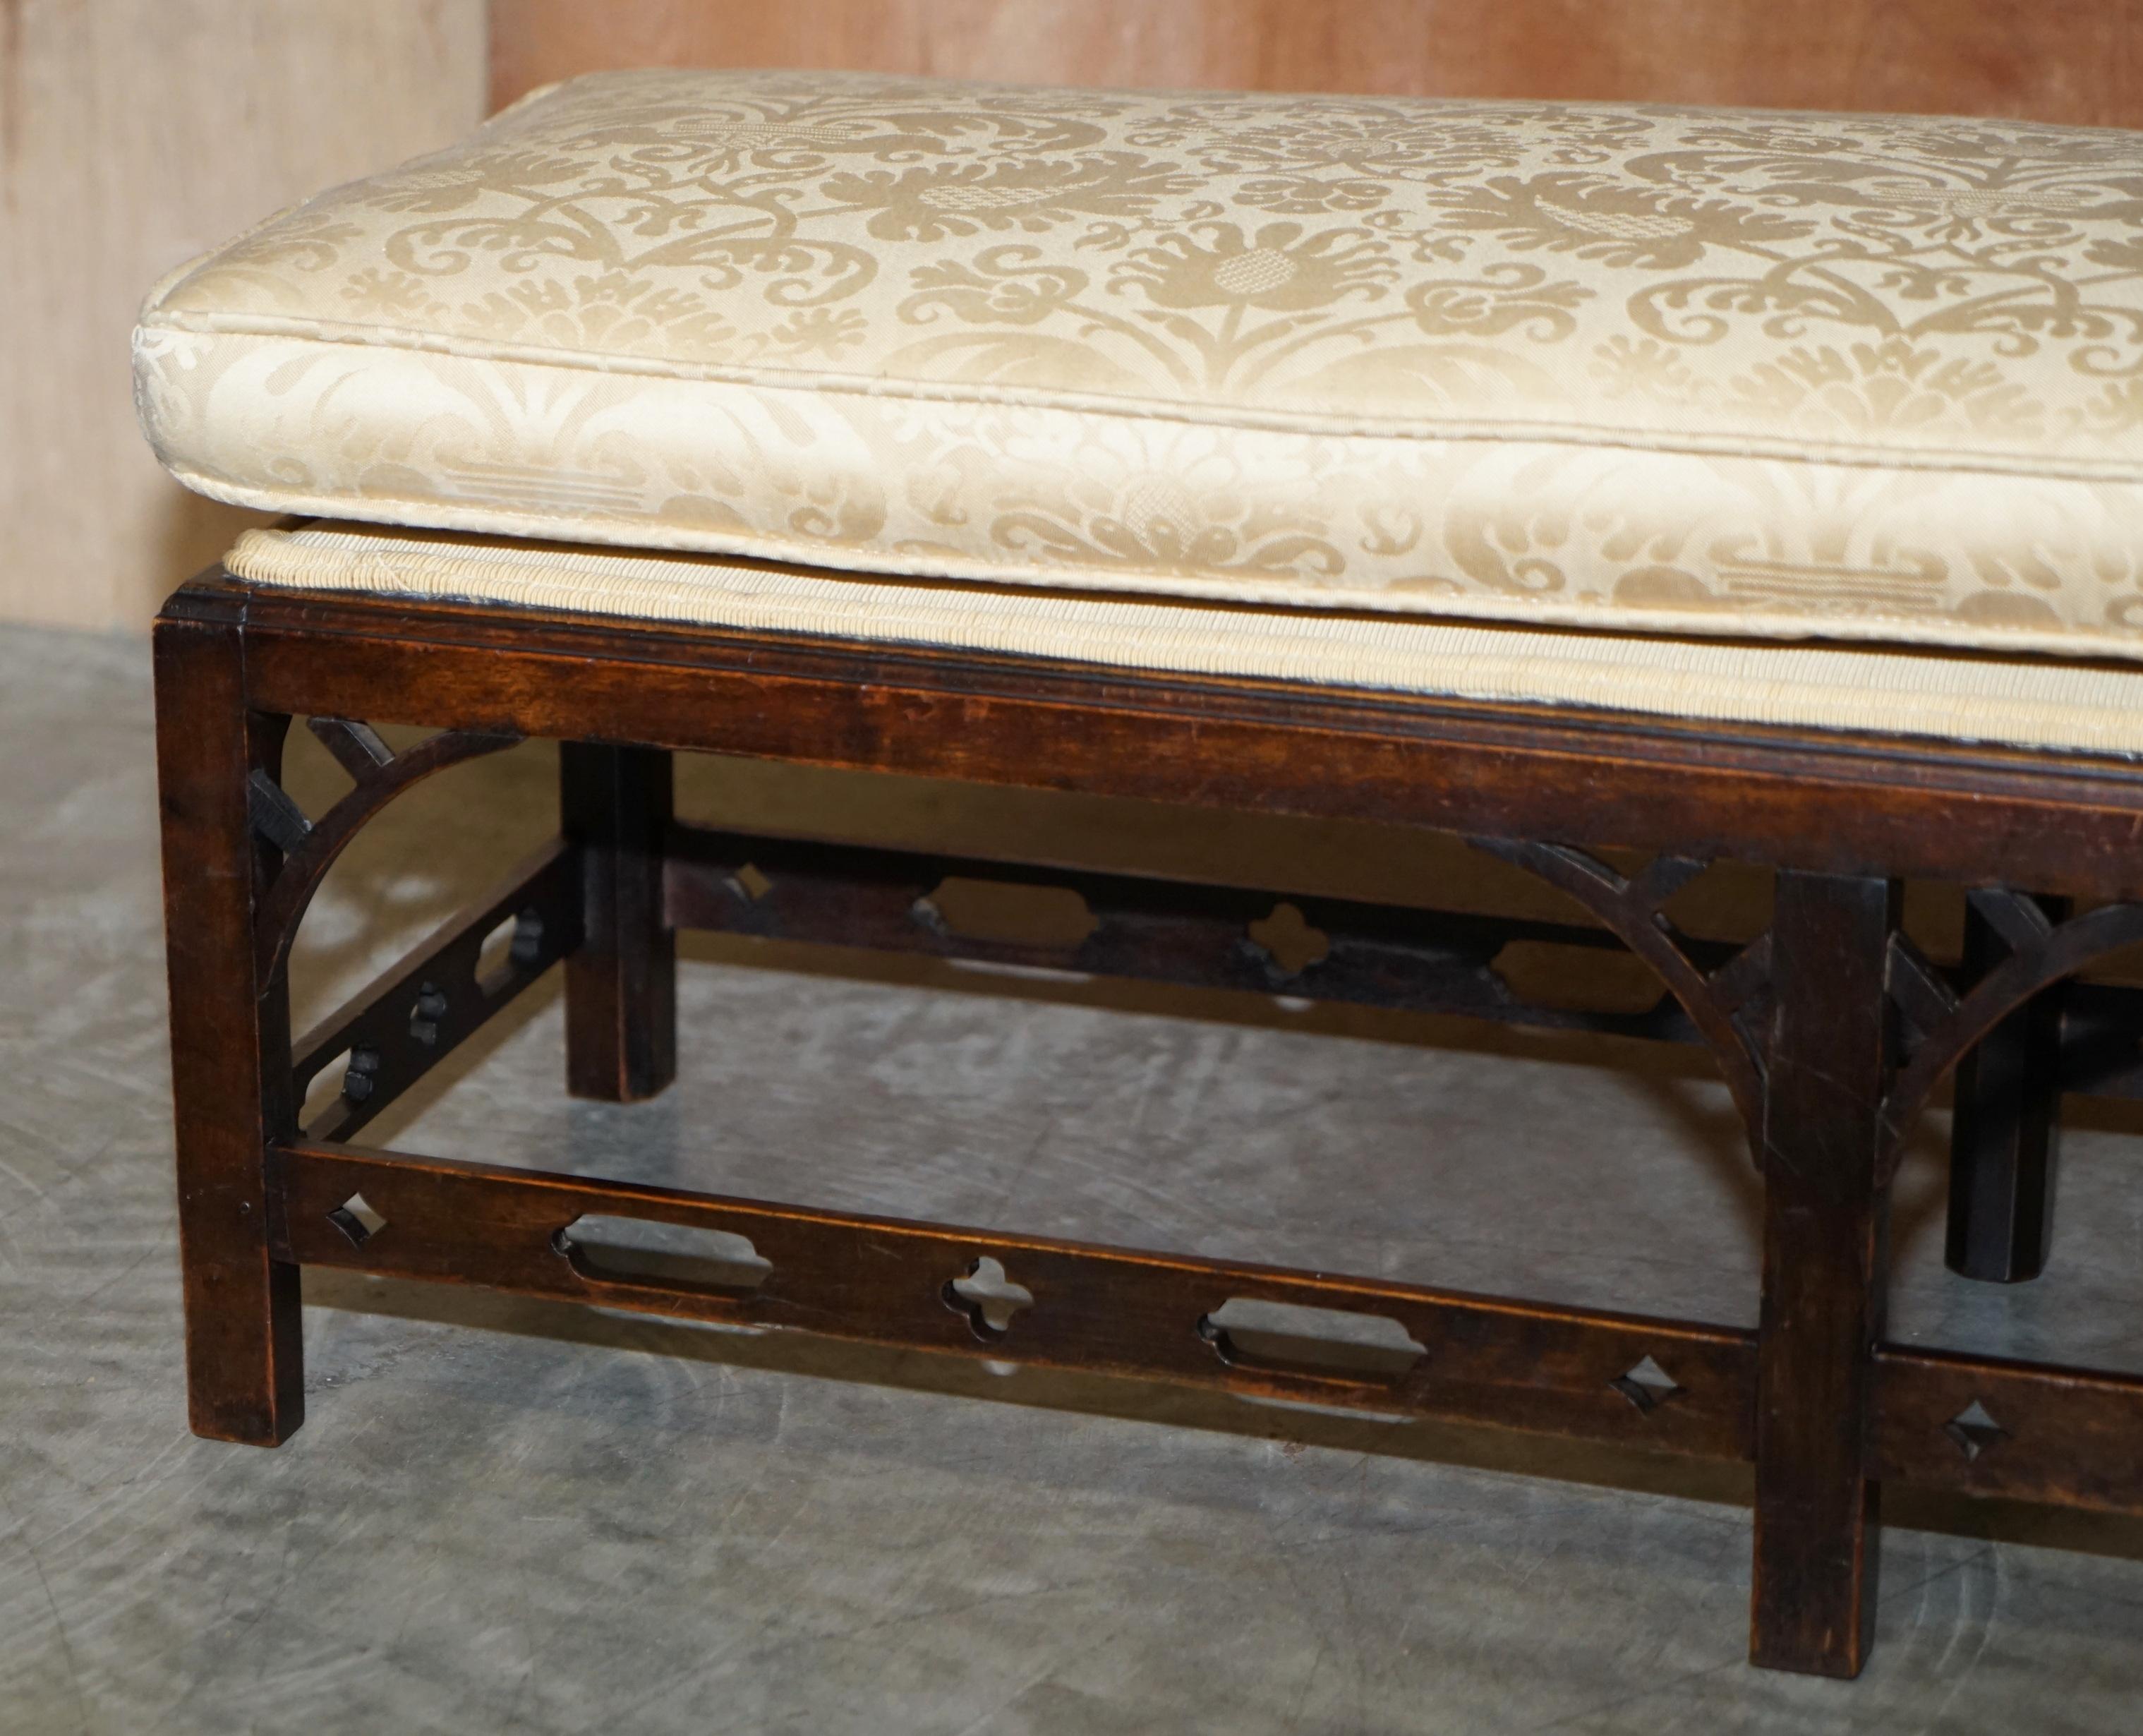 Early 19th Century Antique Georgian Thomas Chippendale Two Person Ottoman Footstool Lovely Carving